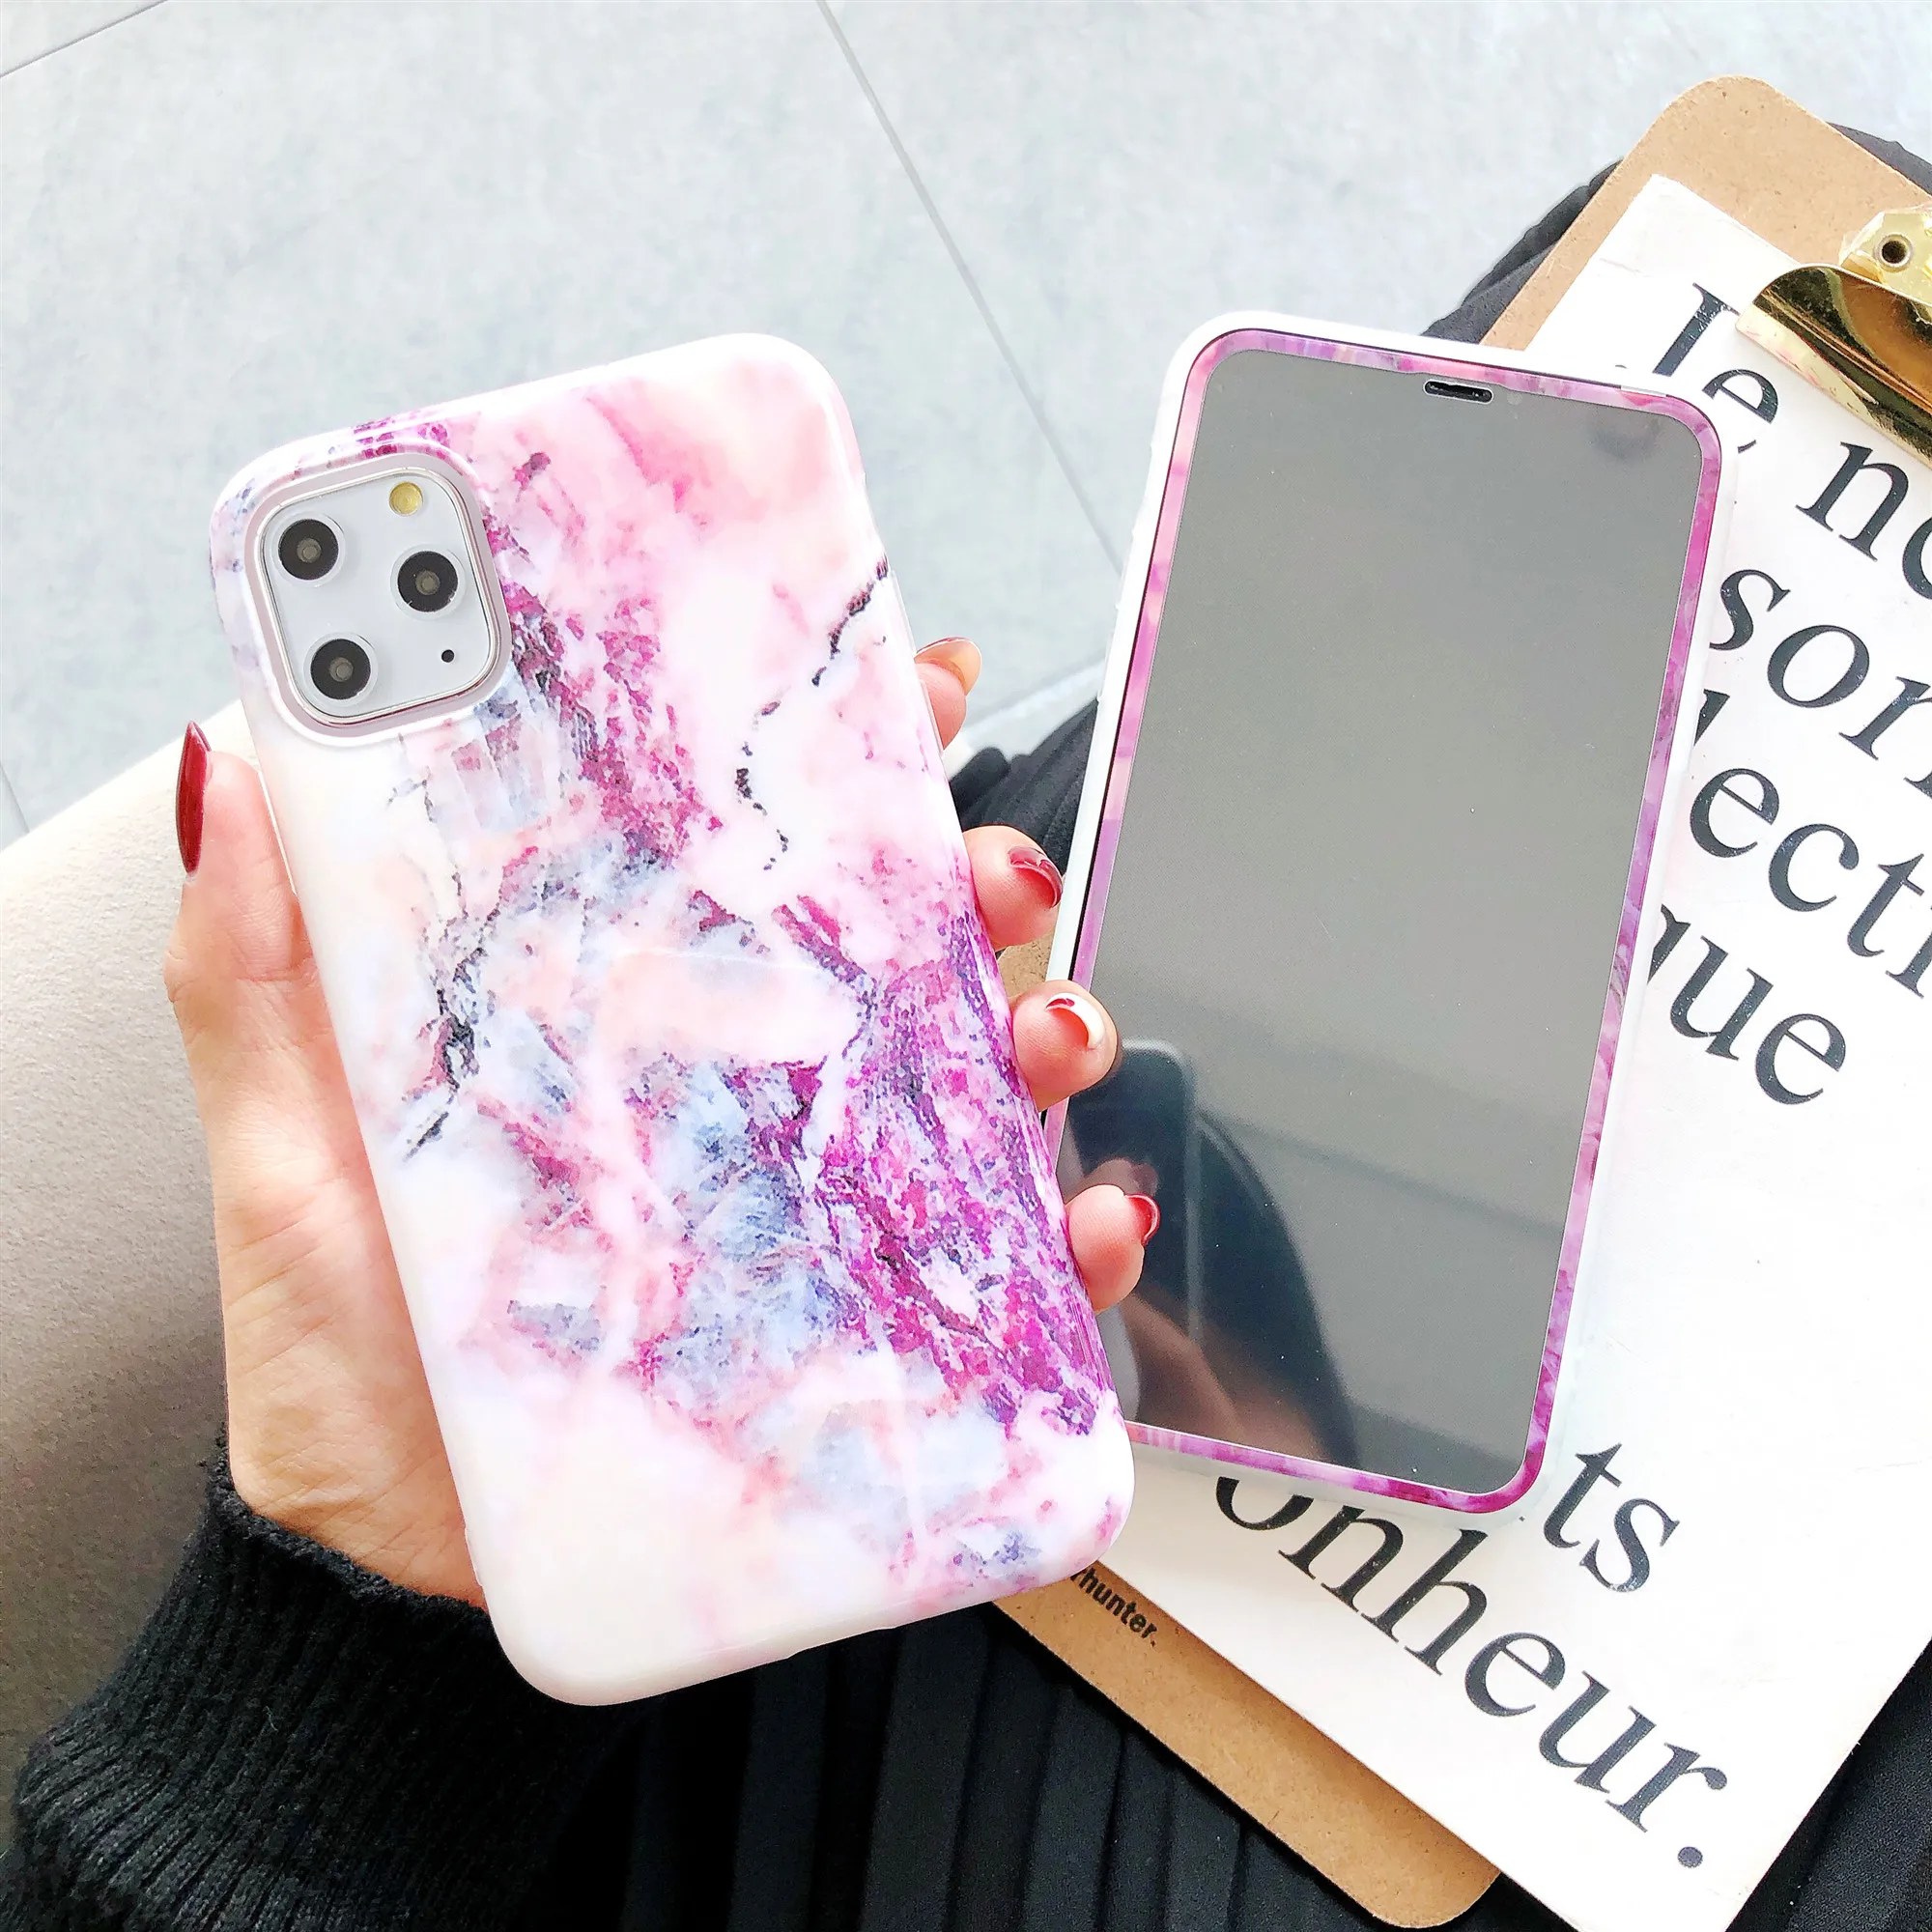 

Marble Pattern Phone Case Soft TPU Back Cover Protective Cover for iPhone 6 6s 6P 6sP 7 7P 8 8P X XS XR XSMAX 11 11Pro 11ProMAX